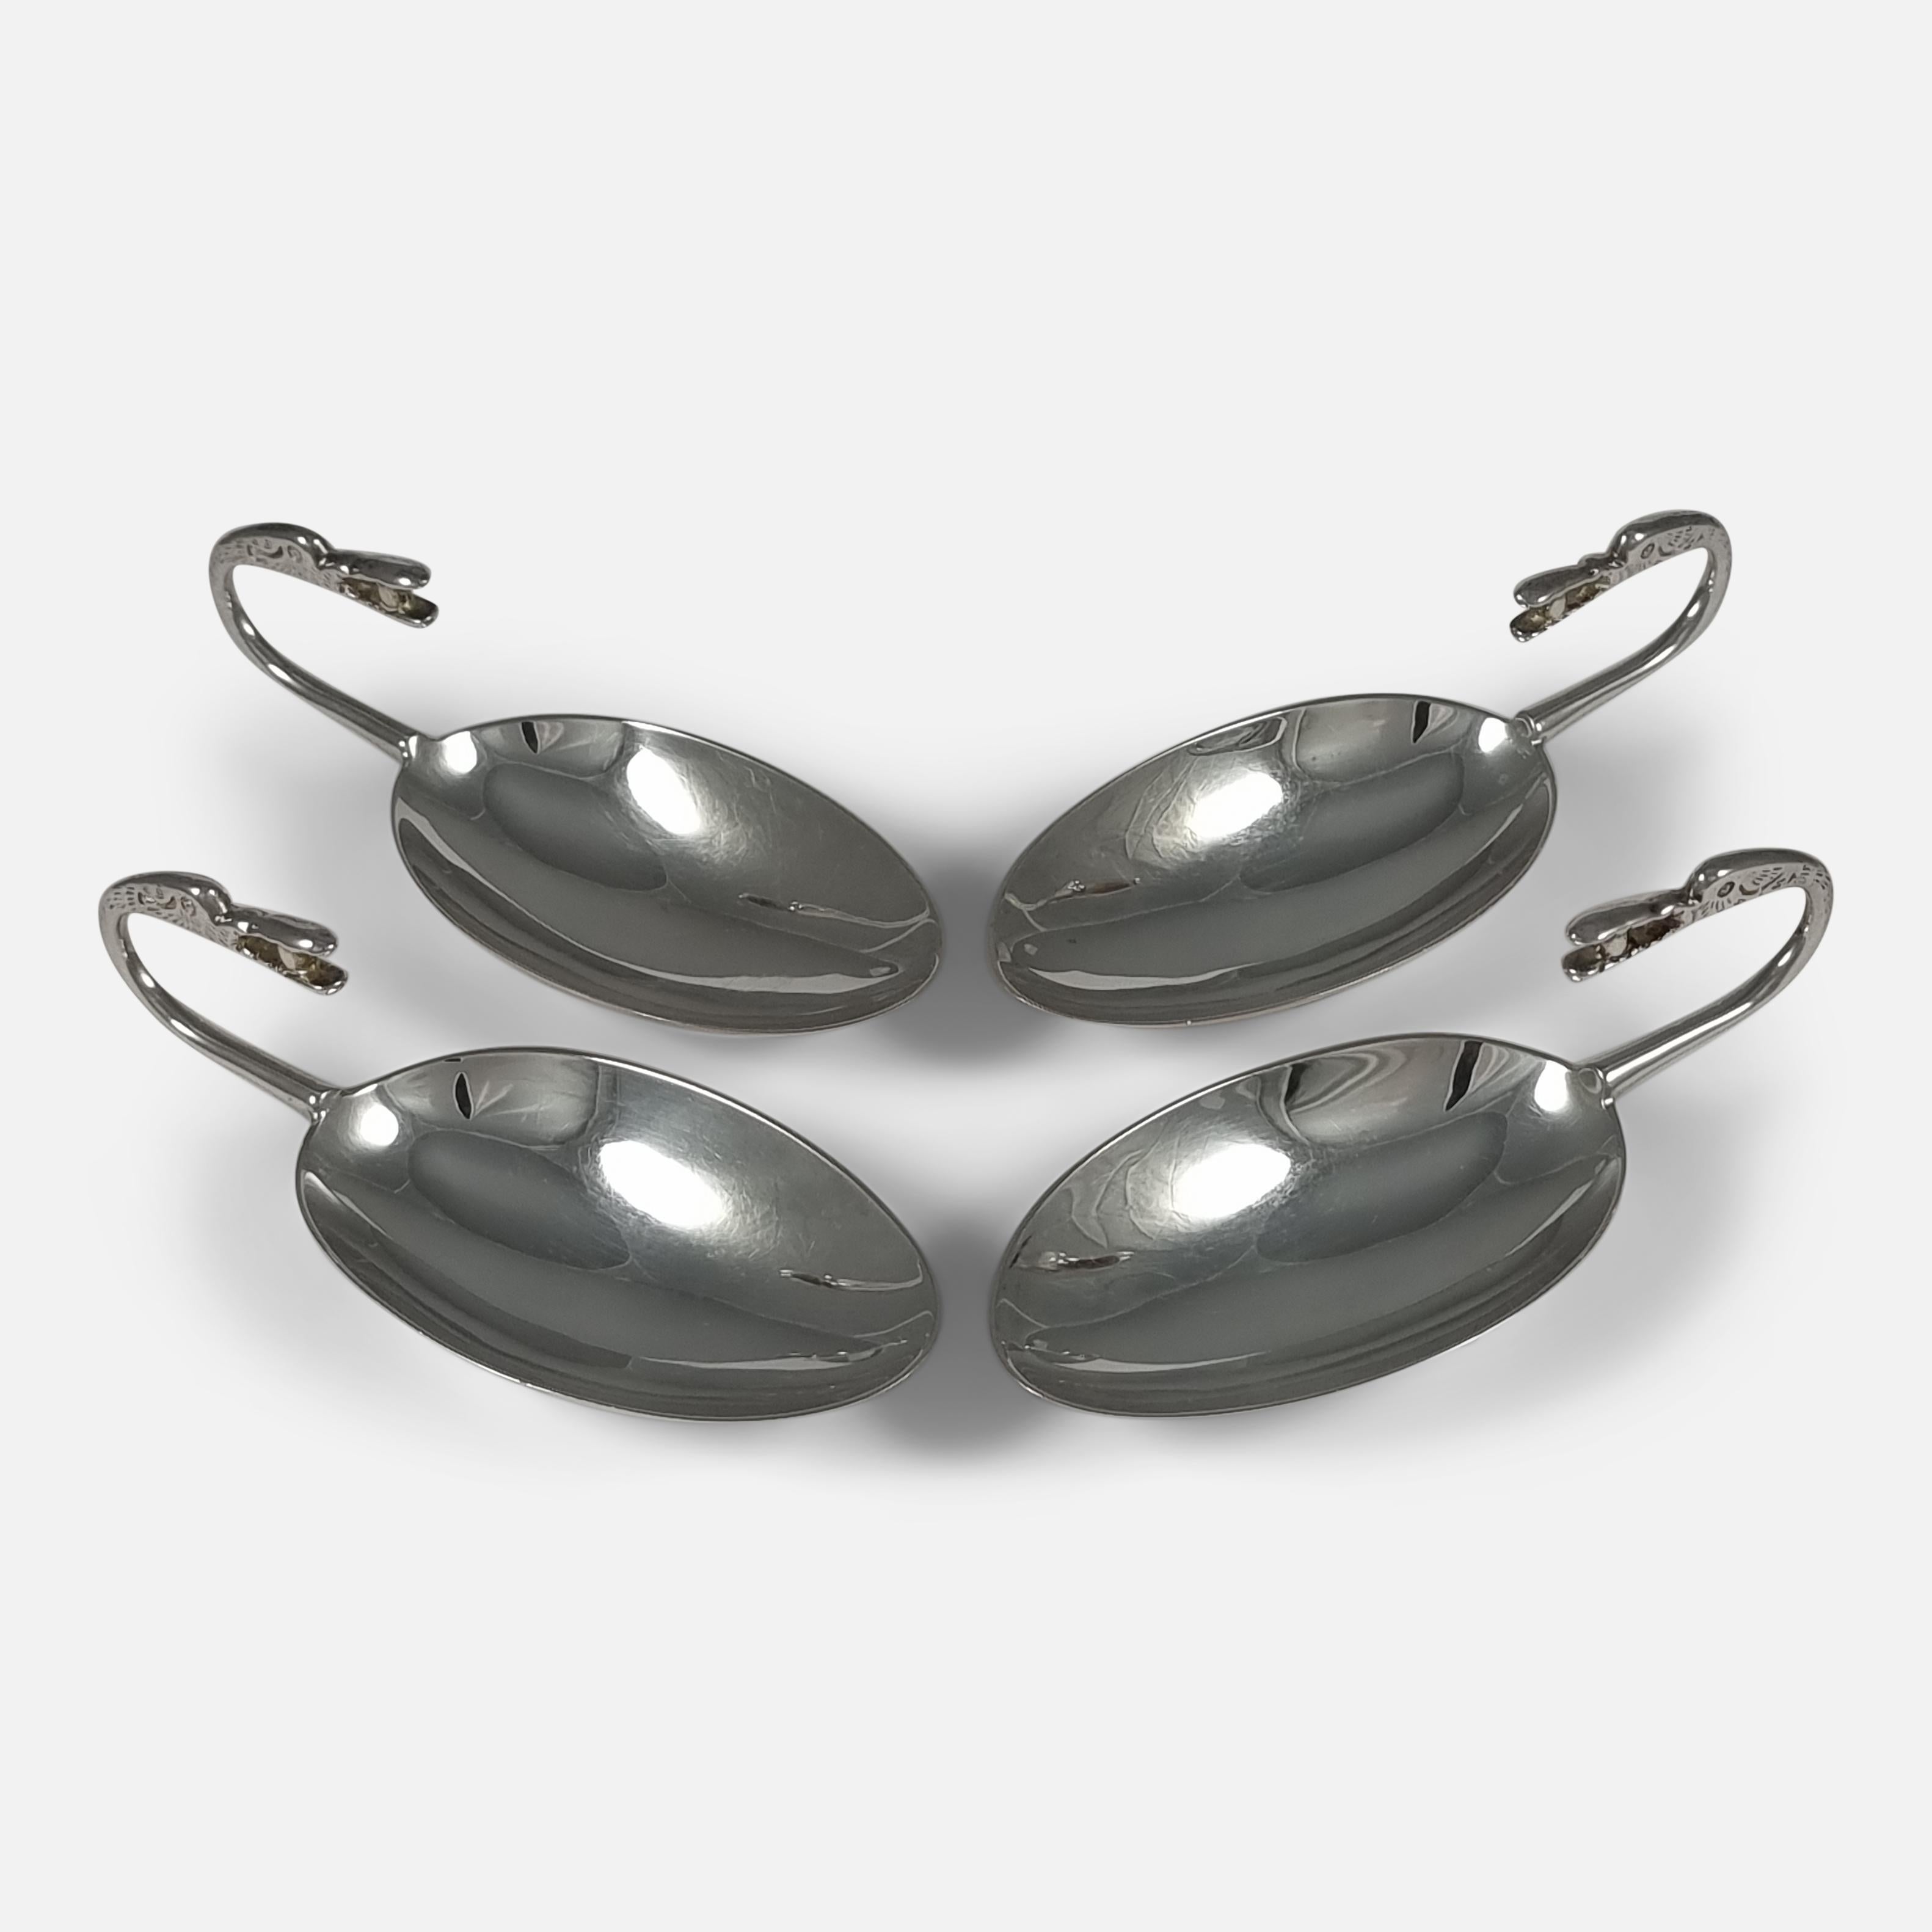 Classical Roman Set of 4 Sterling Silver Traprain Dishes or Tastevins, Brook & Son, 1937 For Sale